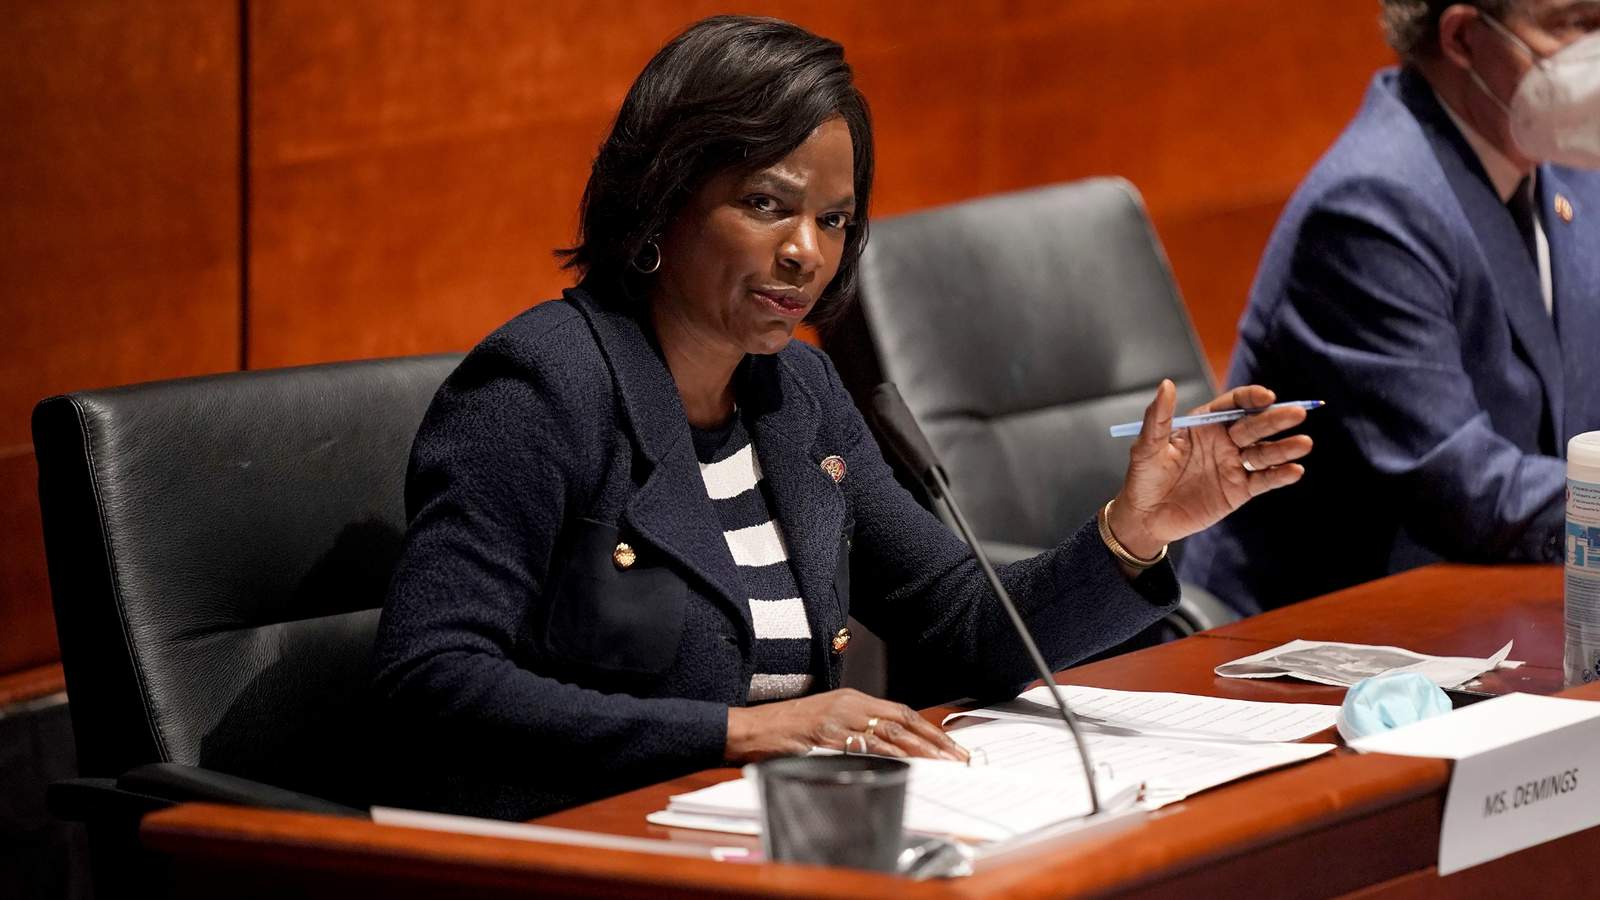 Rep. Val Demings weighs in on renewed calls for gun control, southern border policy